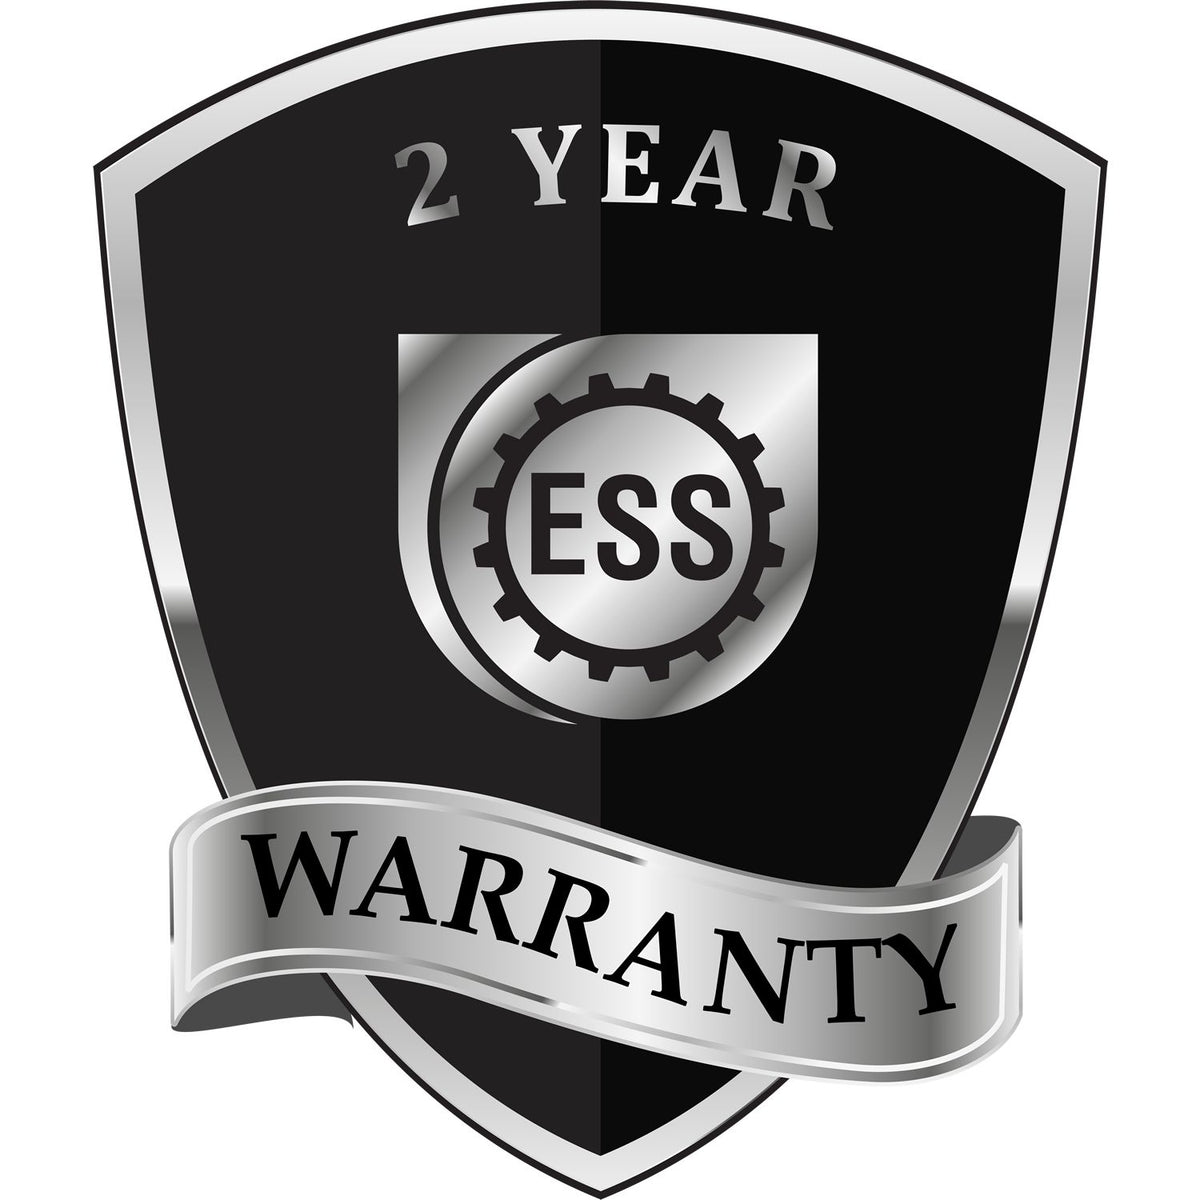 A black and silver badge or emblem showing warranty information for the Long Reach Kansas Geology Seal